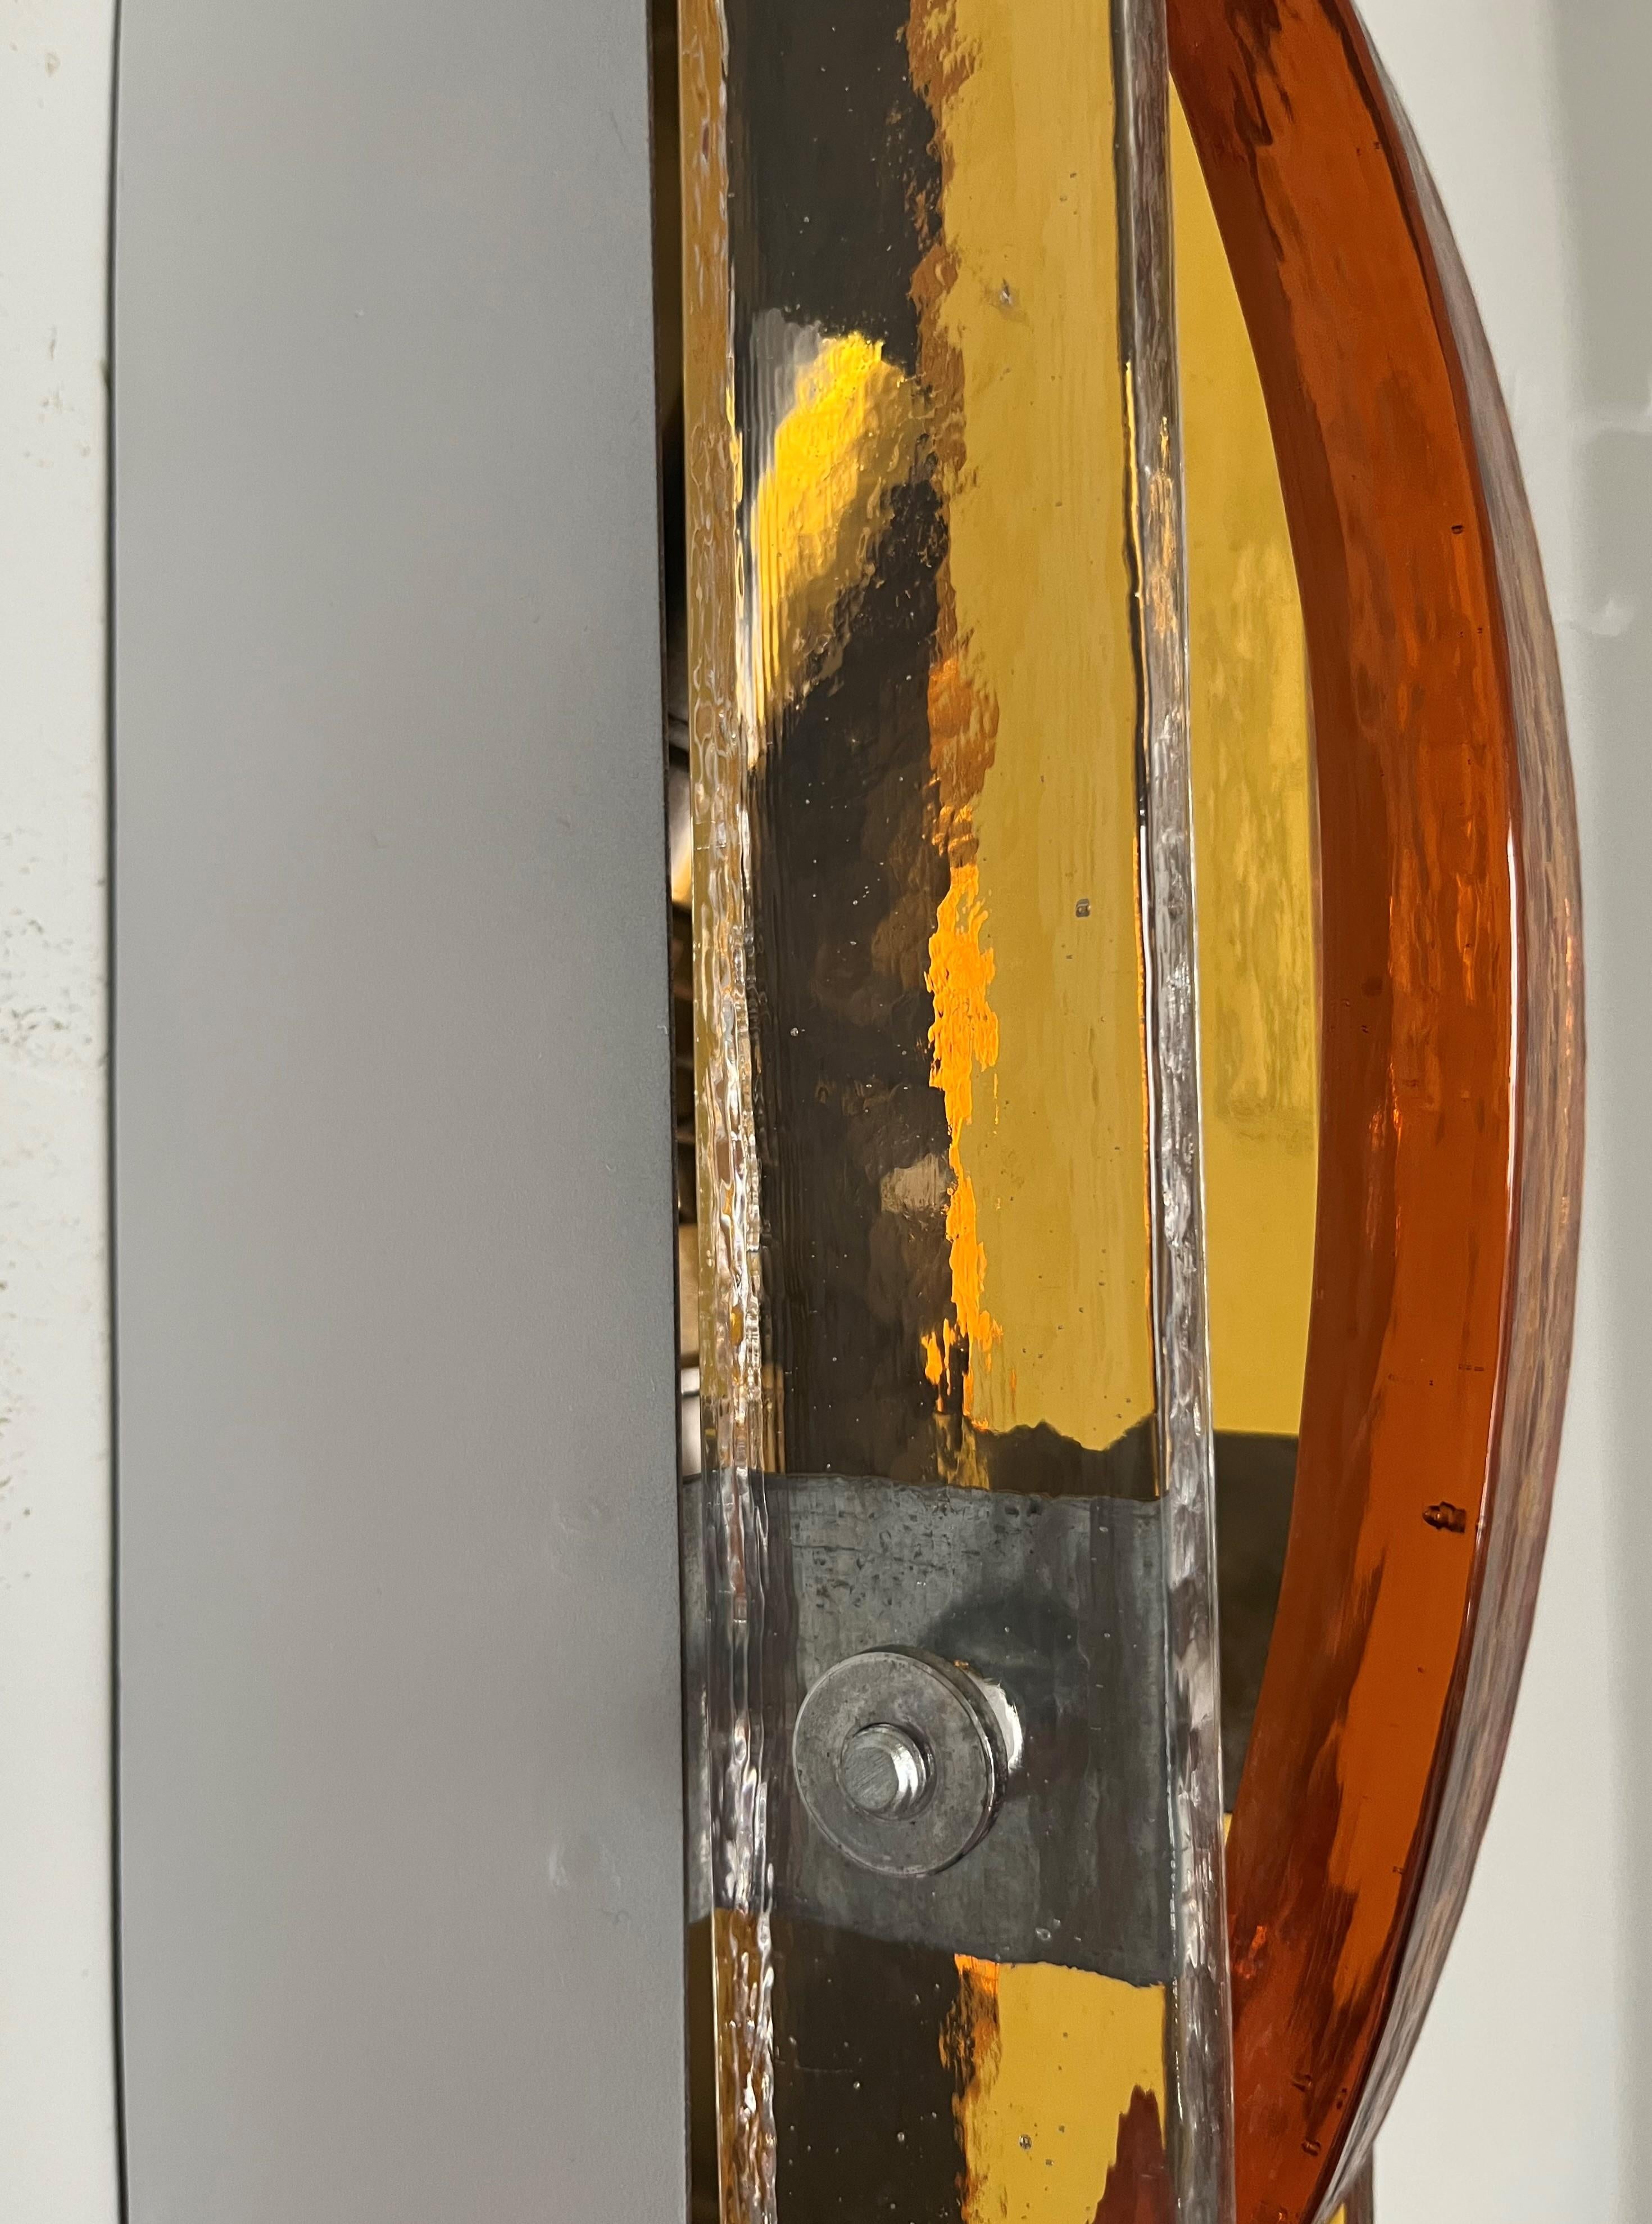 Italian Midcentury Amber Clear Murano Glass Wall Sconces by Poliarte, 1970s For Sale 2